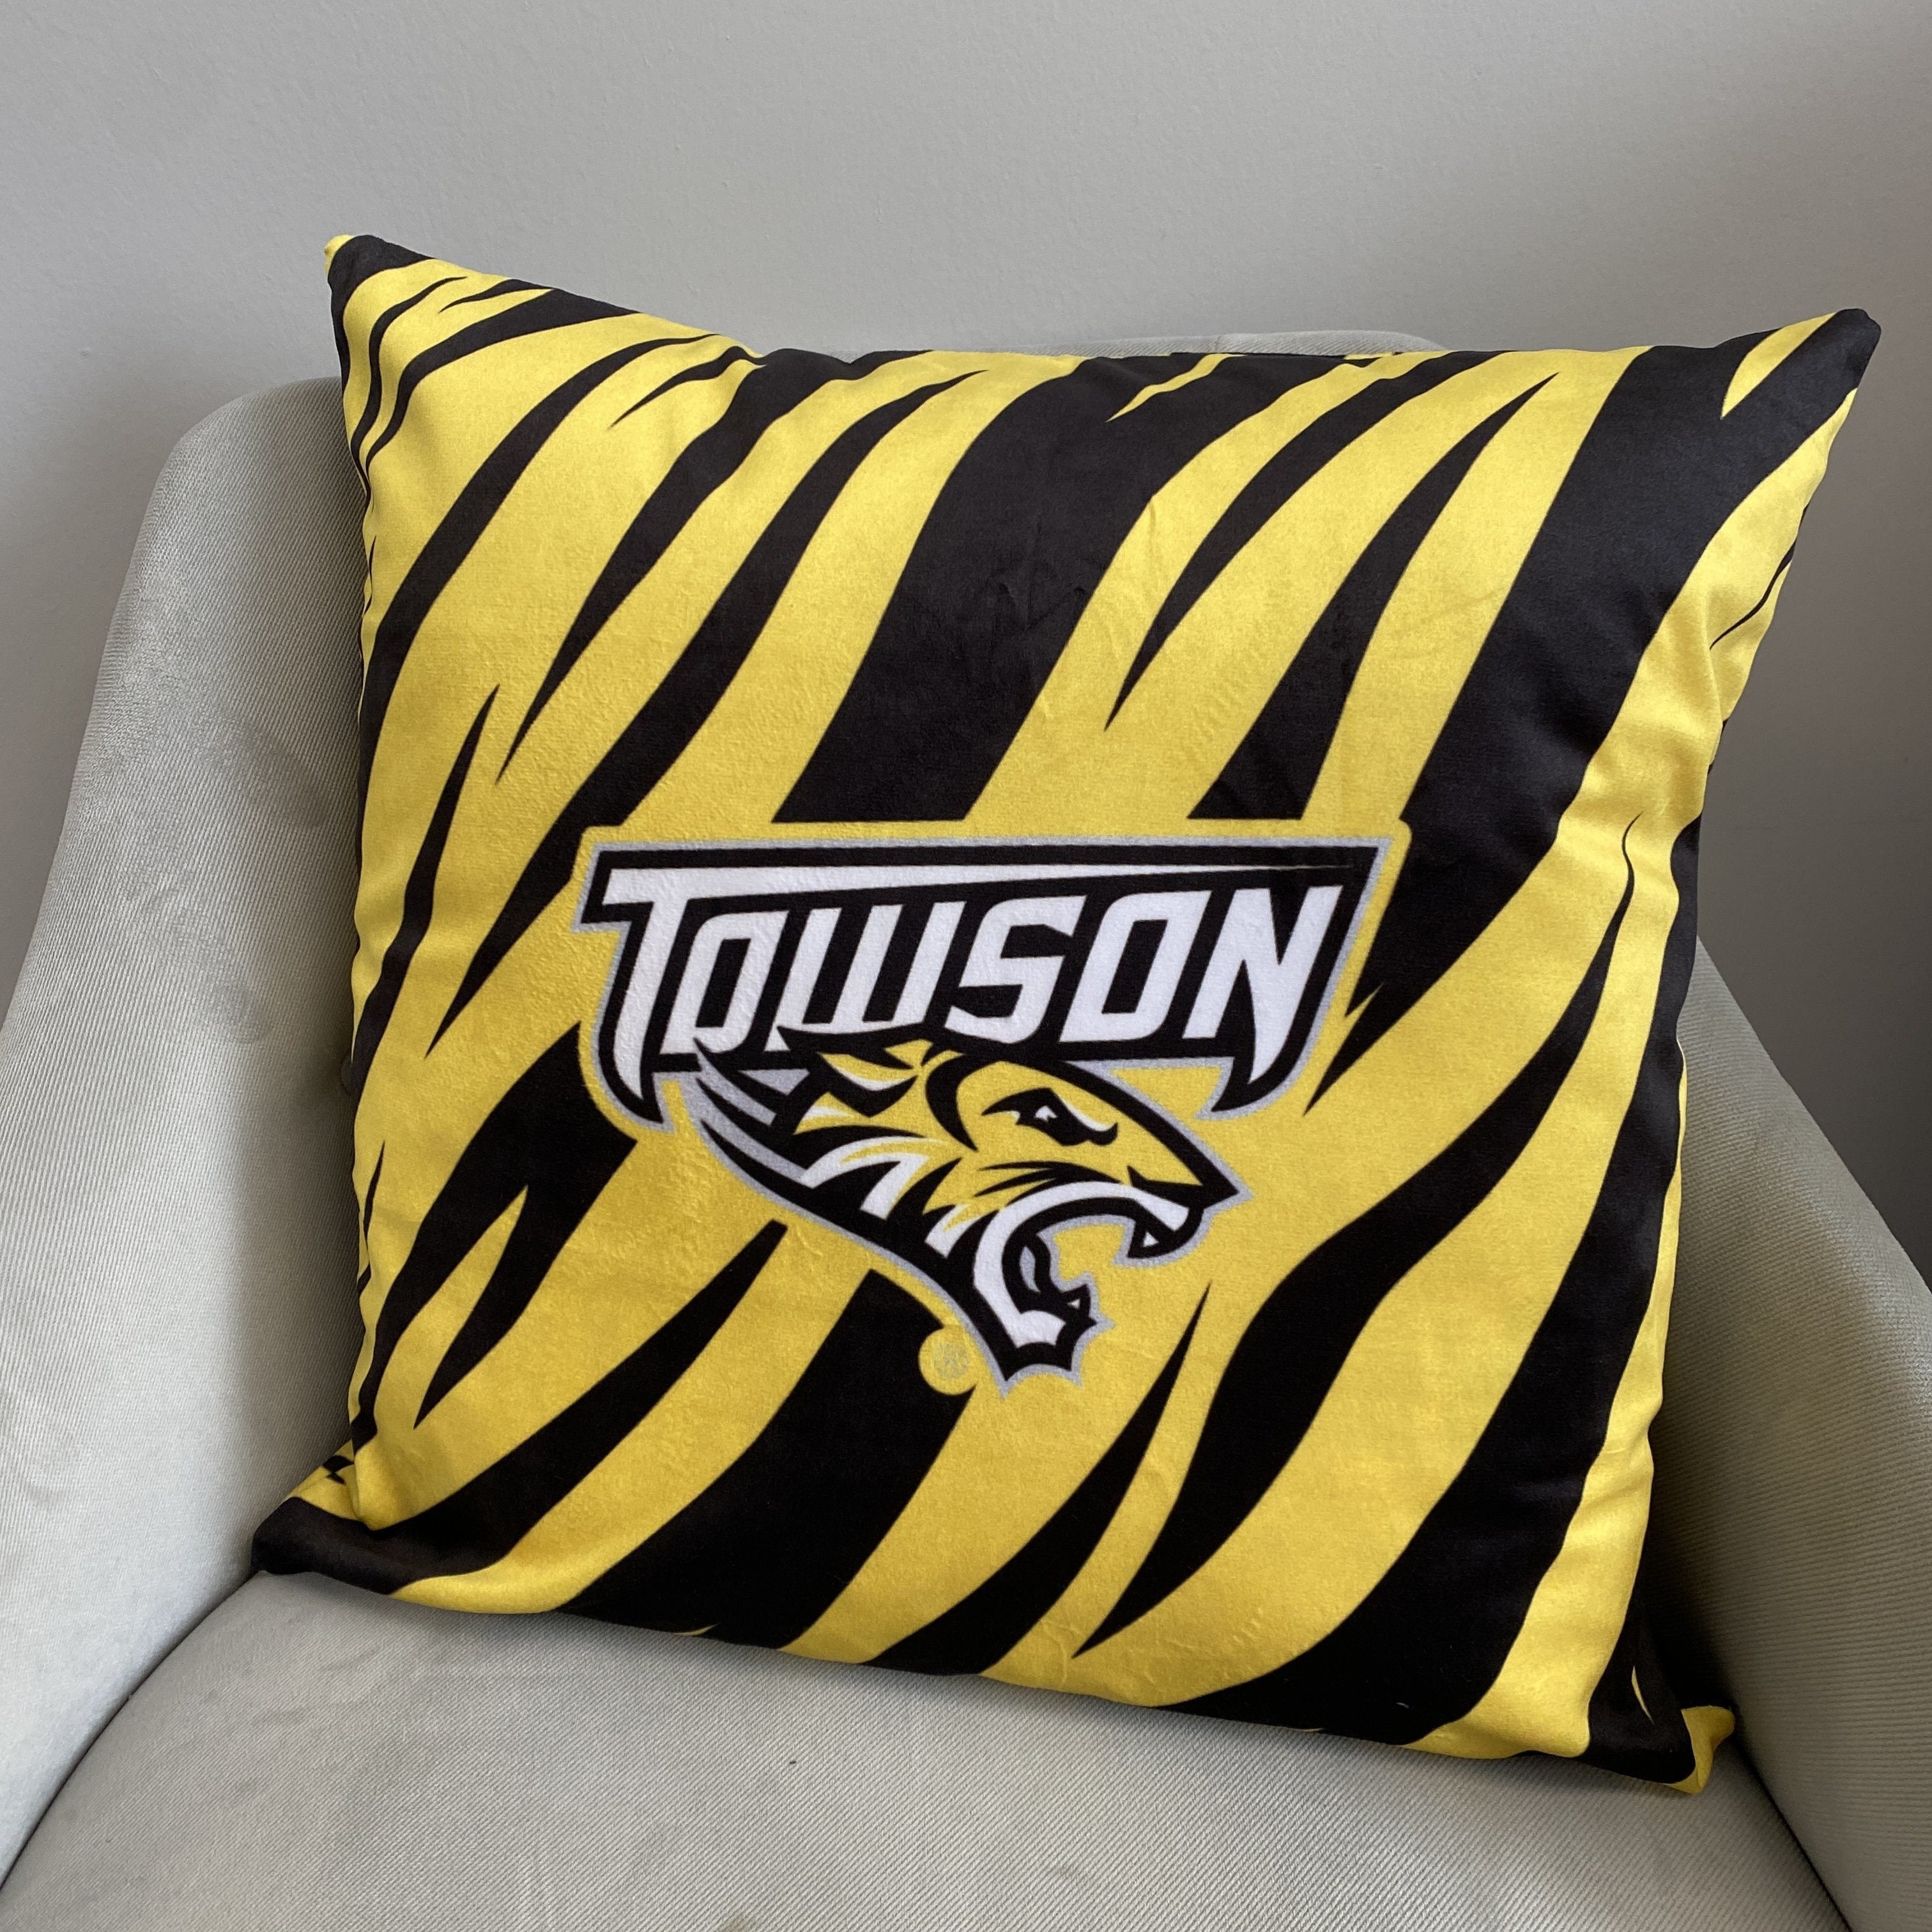 Tiger Pattern With Towson Logo (Black/Gold) / Throw Pillow - Route One Apparel